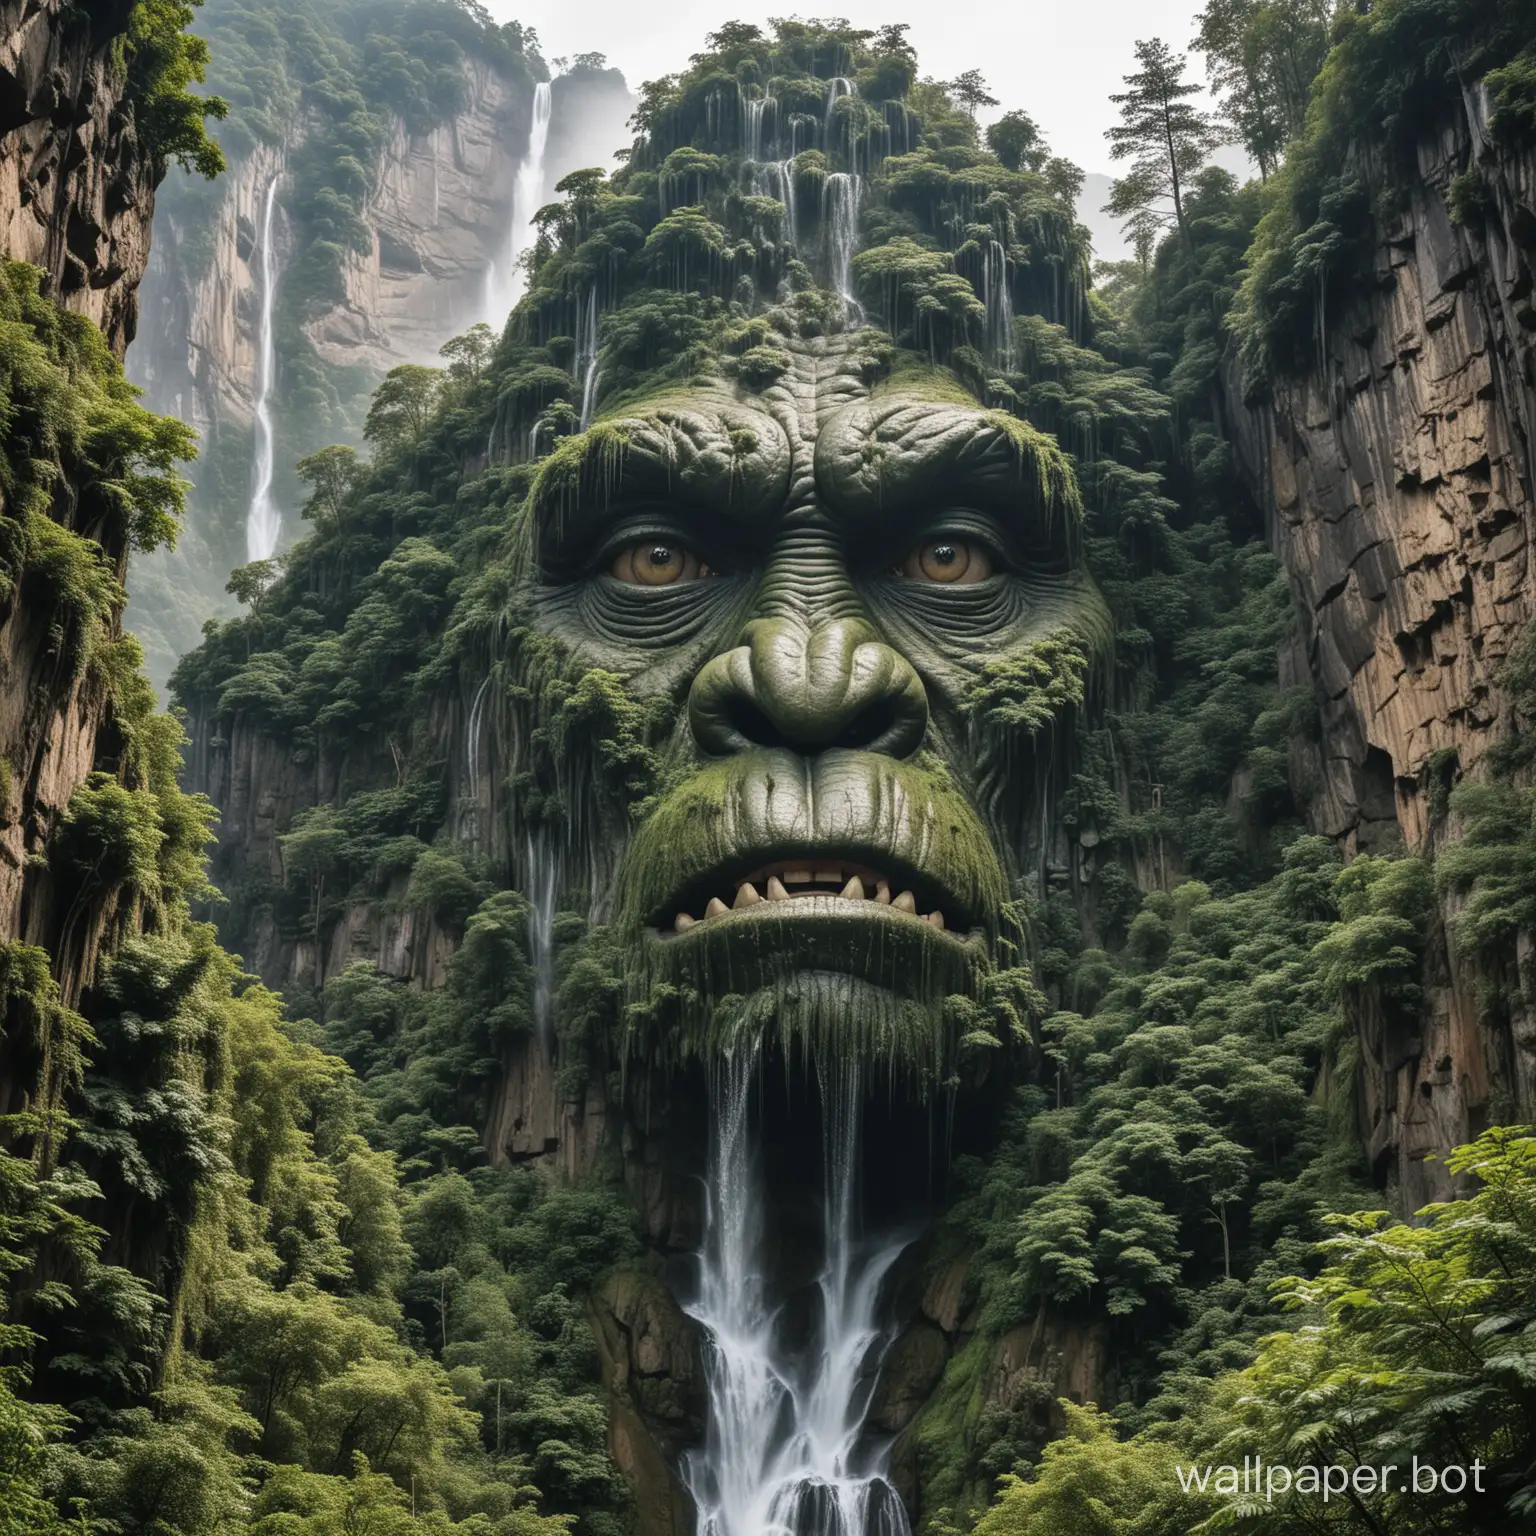 A mountain shaped like a king kong covered in trees with waterfalls coming out of the eye sockets